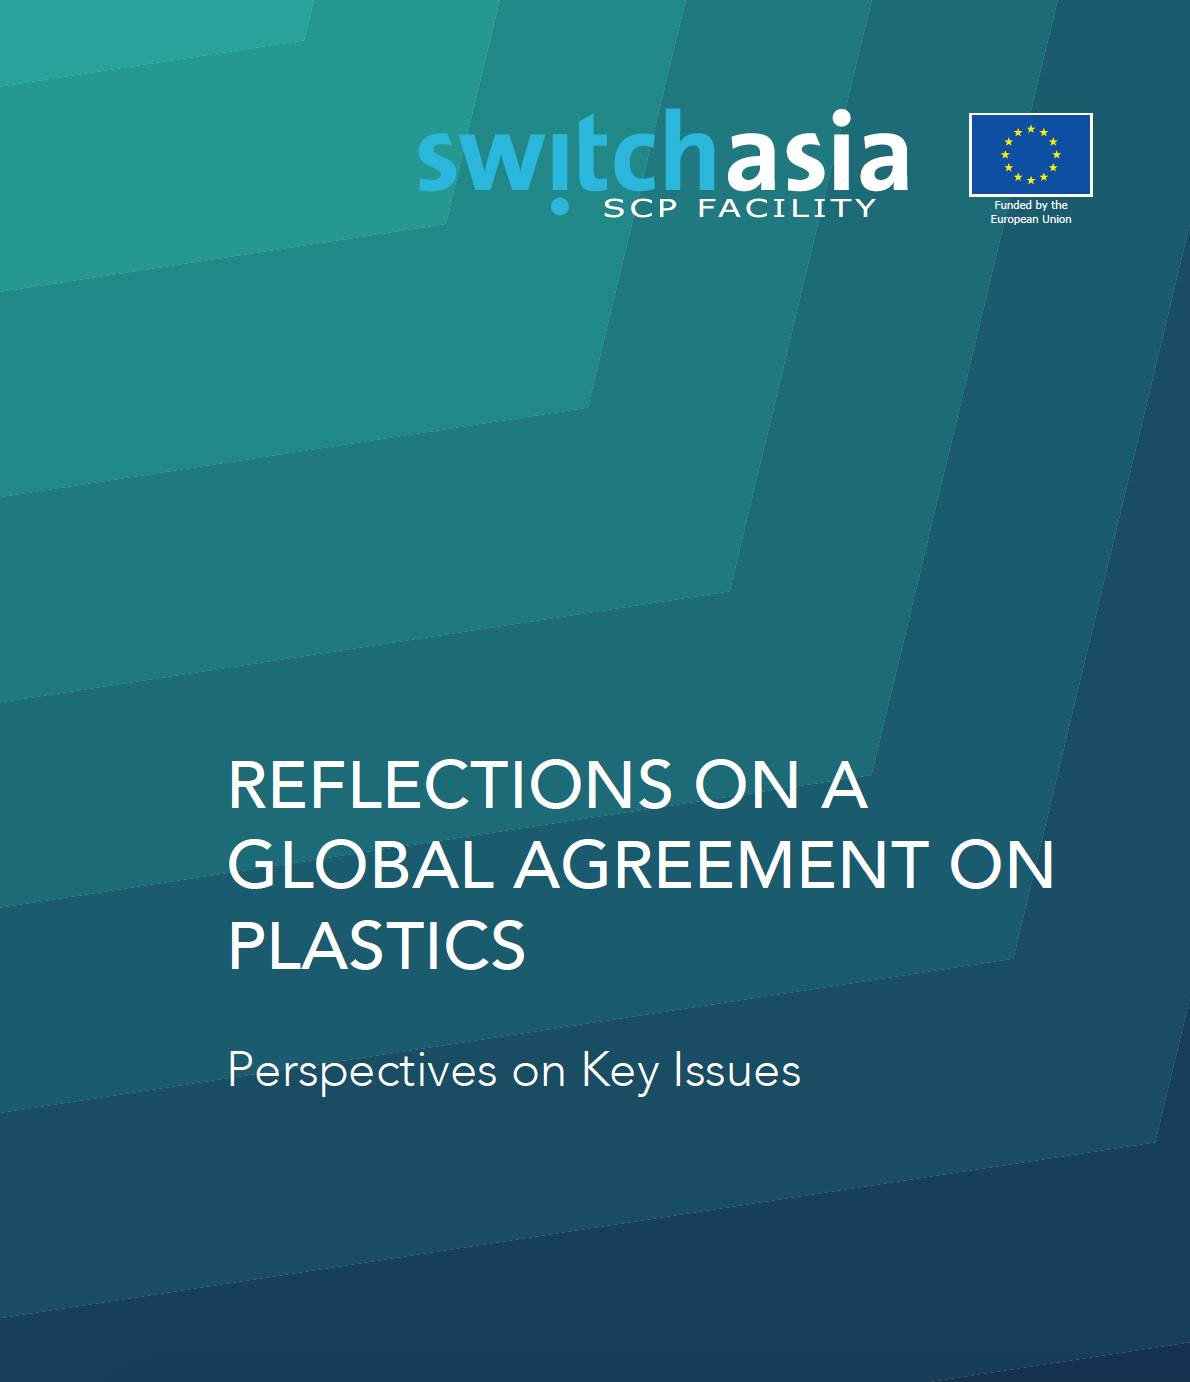 Reflections on a Global Agreement on Plastics3437